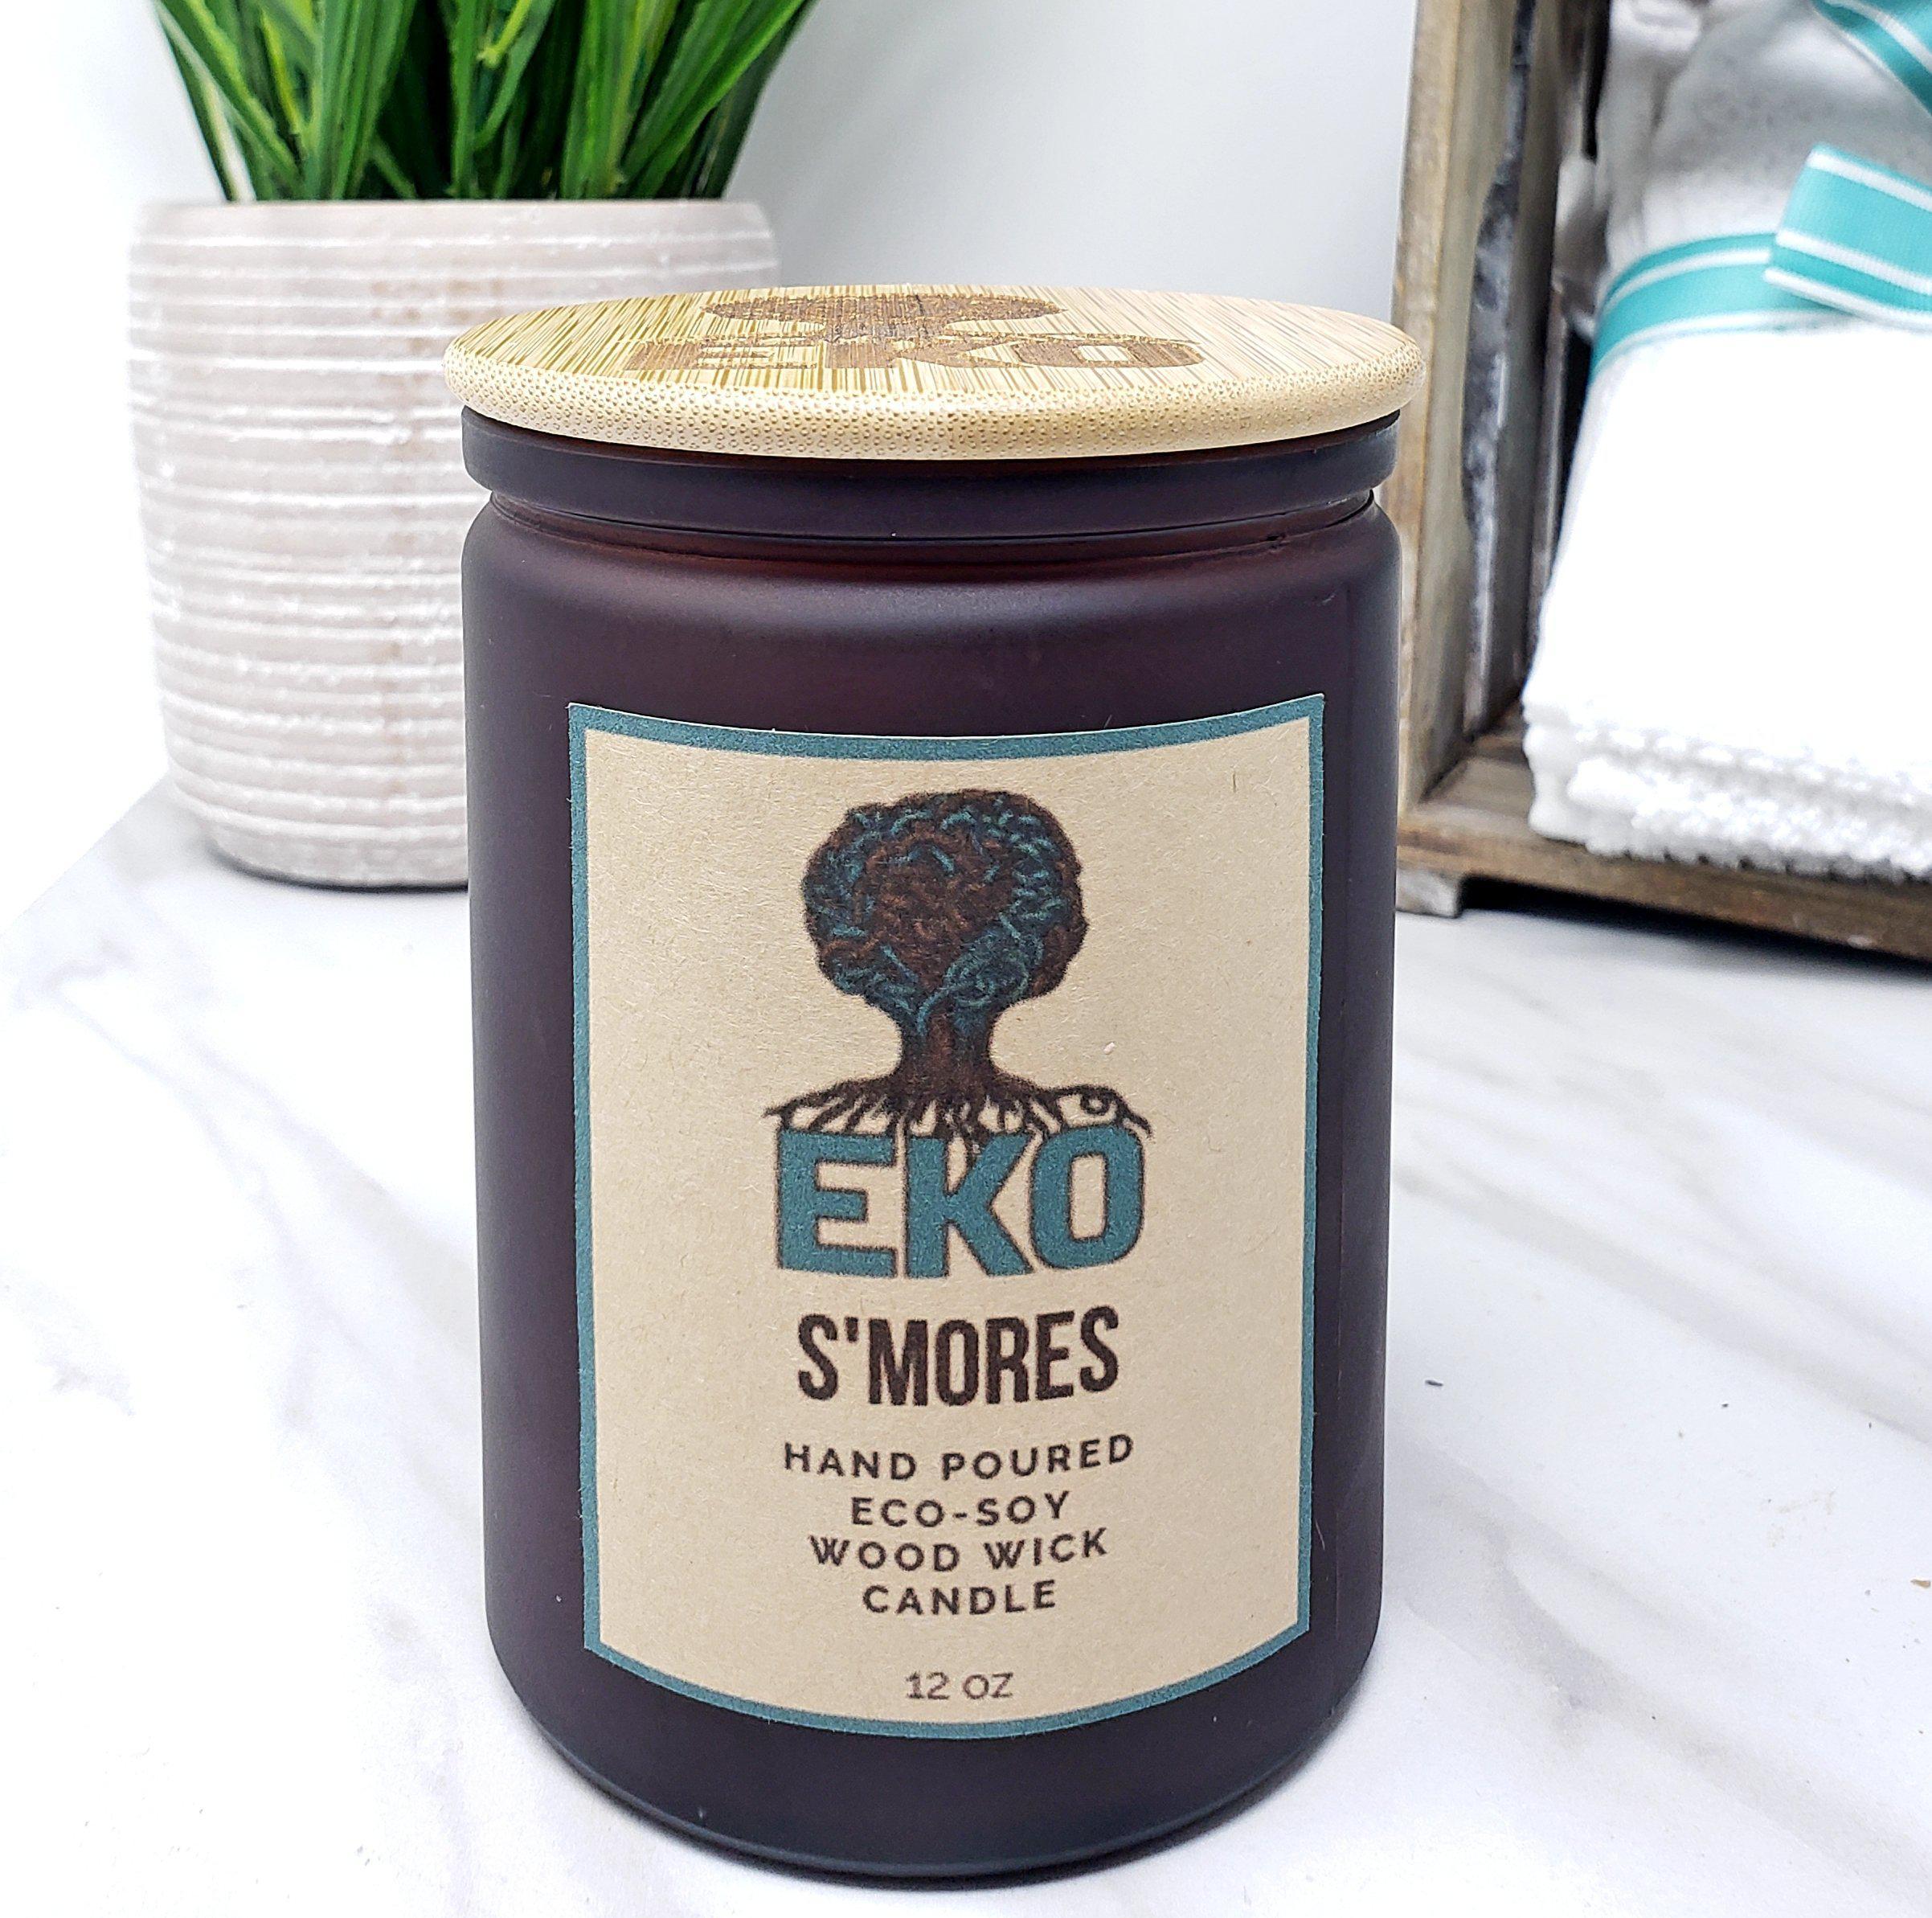 S'mores Eco-Soy Candle